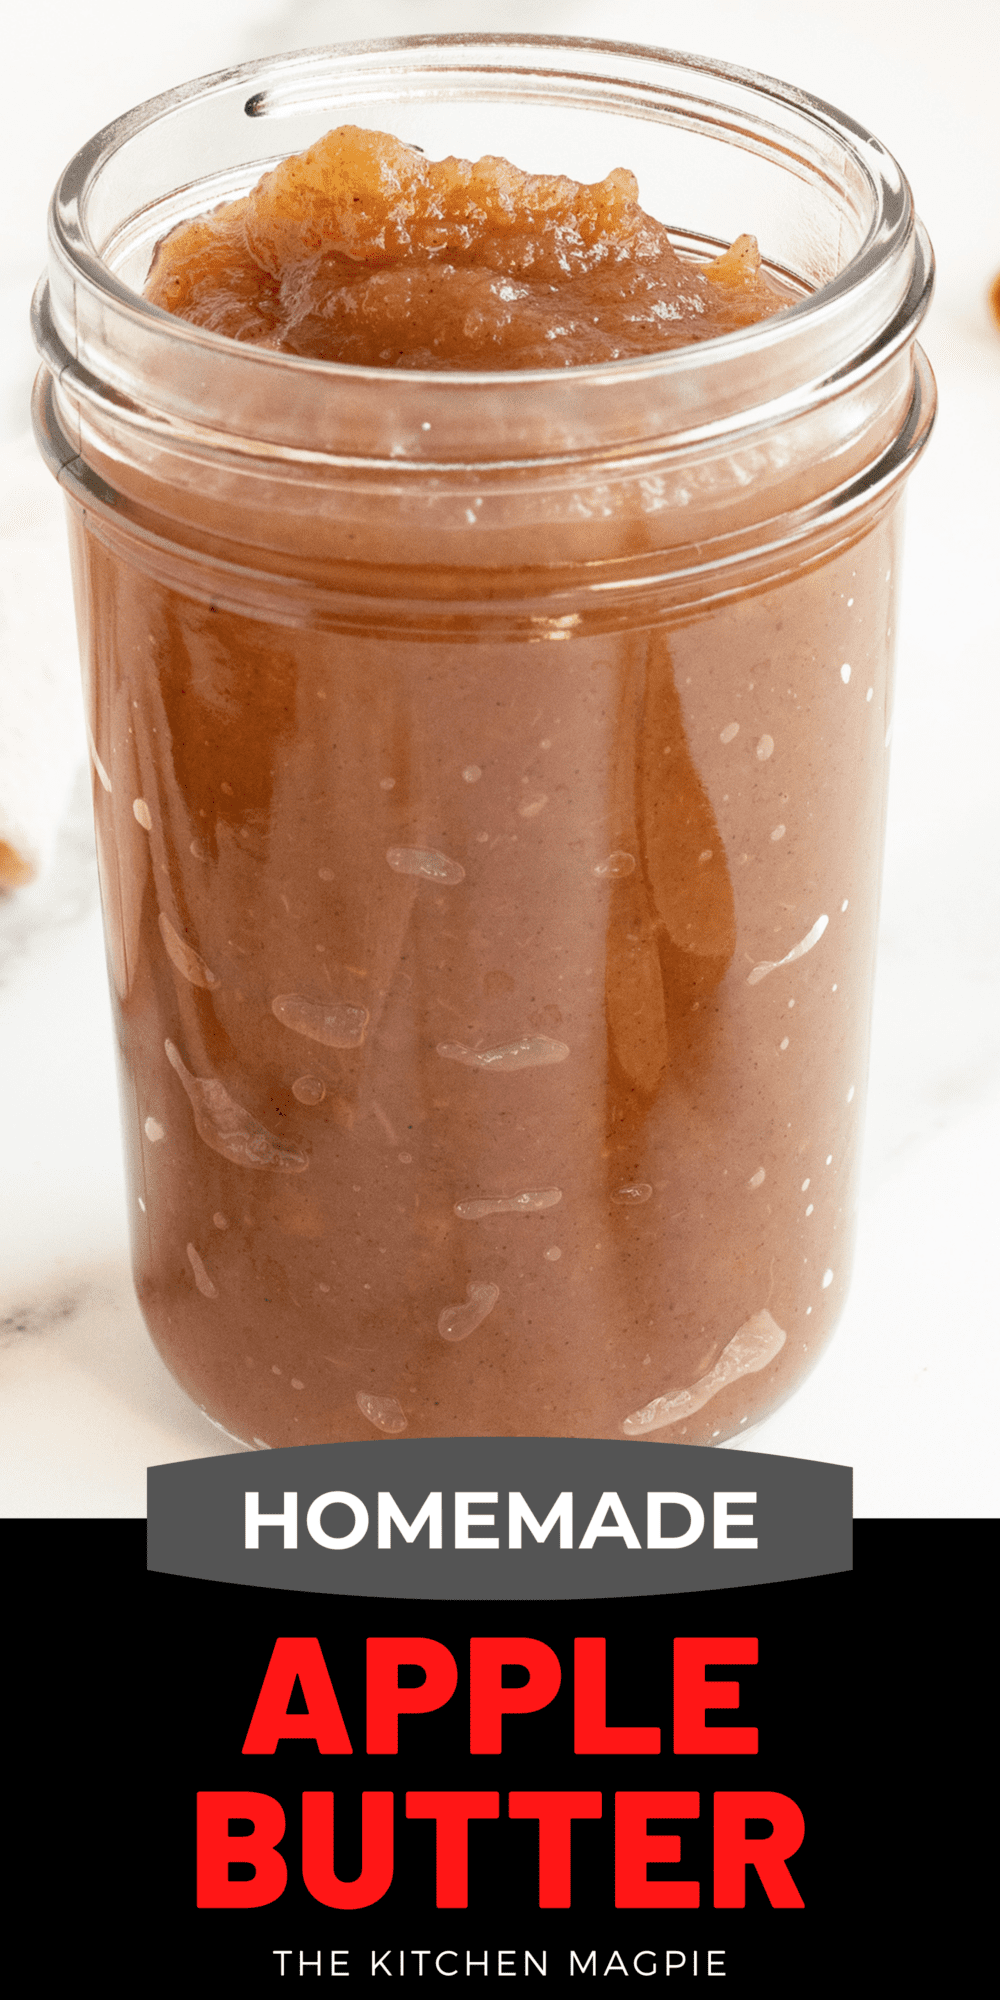 Mixed with plenty of autumnal spices and blended into a smooth paste, apple butter can be used as an ingredient in plenty of dessert recipes or spread onto some toast and eaten like marmalade.            